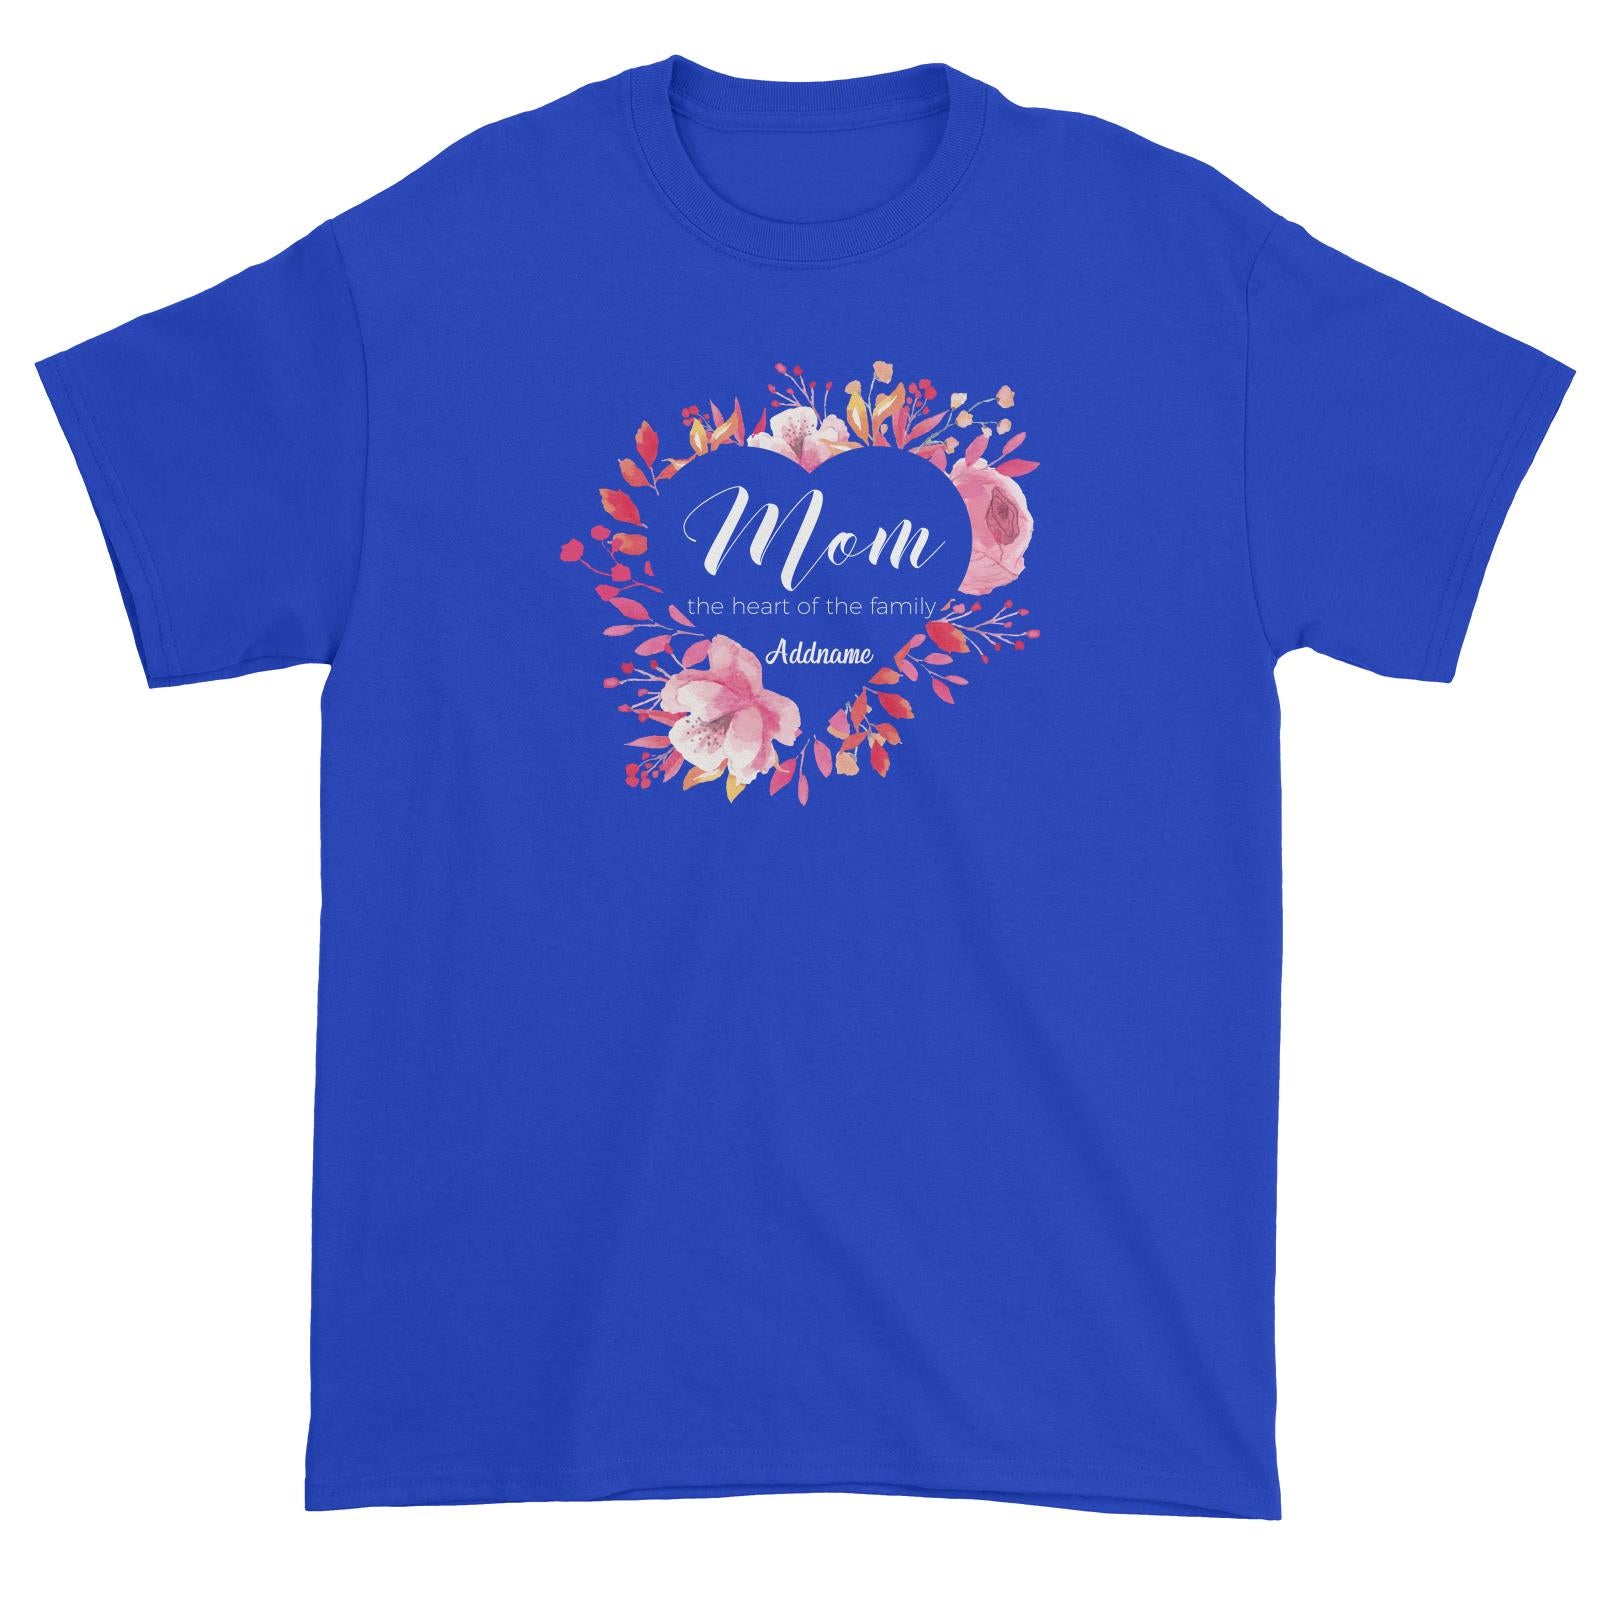 Sweet Mom Heart Mom The Heart of The Family Addname Unisex T-Shirt